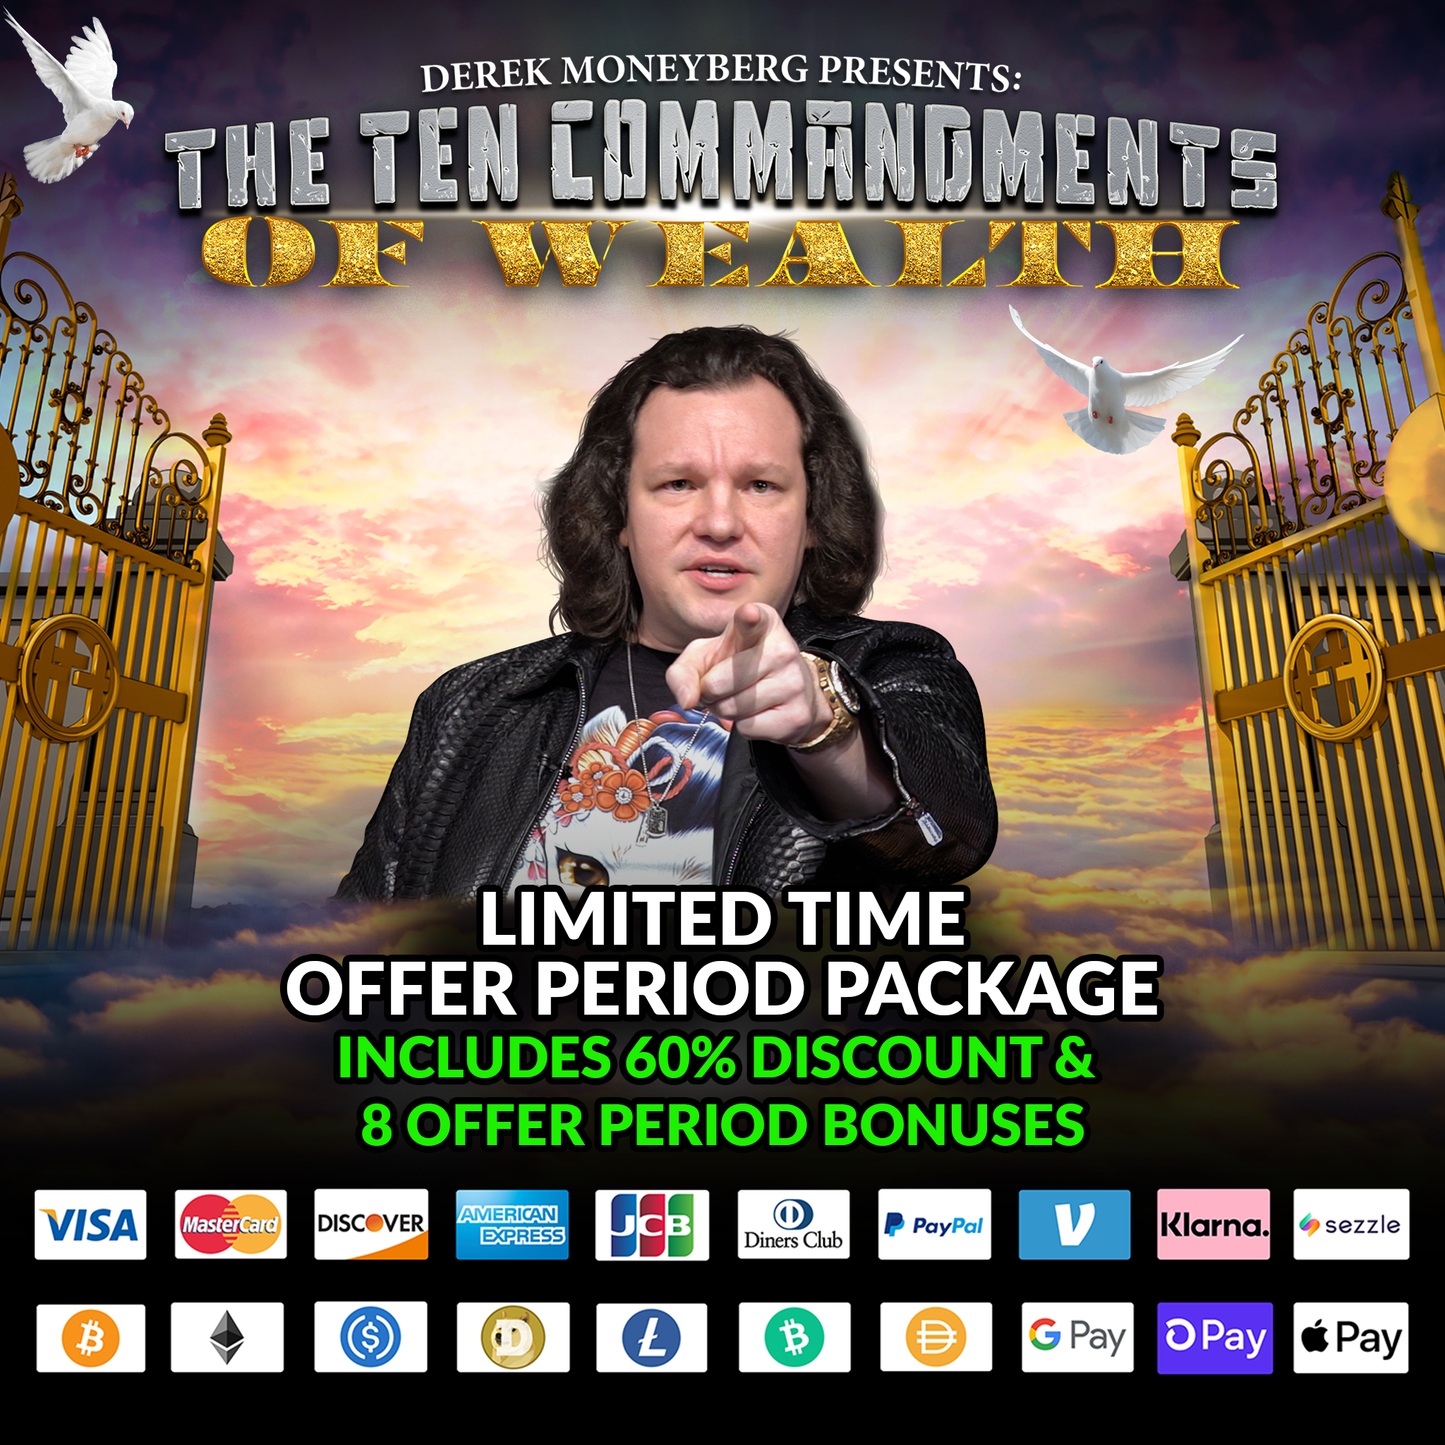 Derek Moneyberg Presents: The Ten Commandments of Wealth (Join Us & Secure The Limited-Time Offer Package)